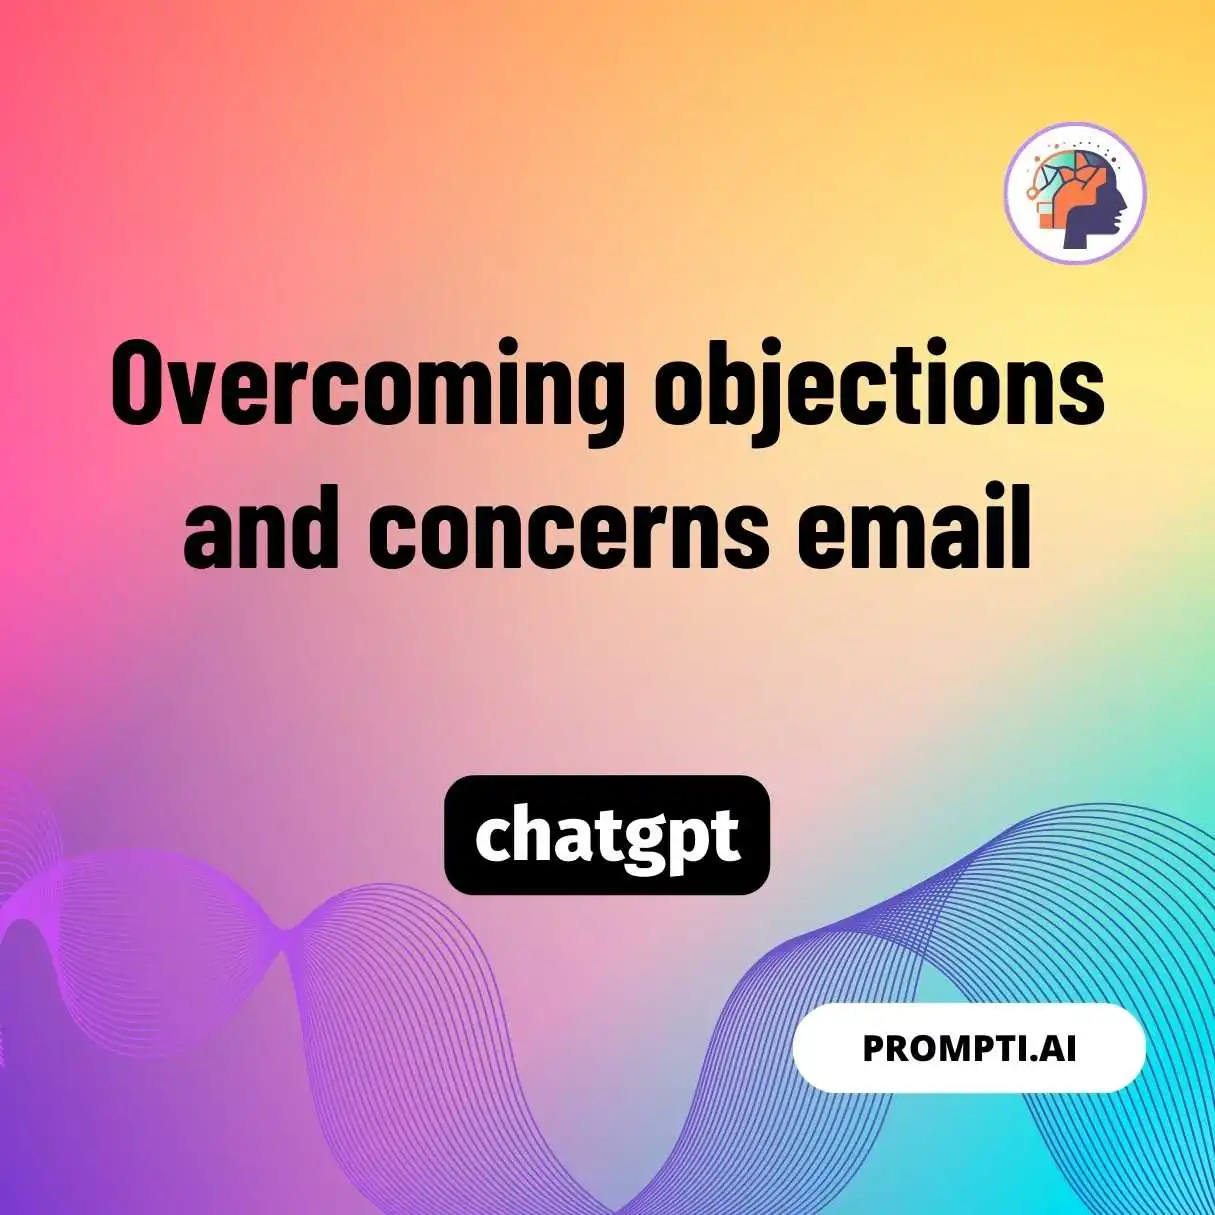 Overcoming objections and concerns email